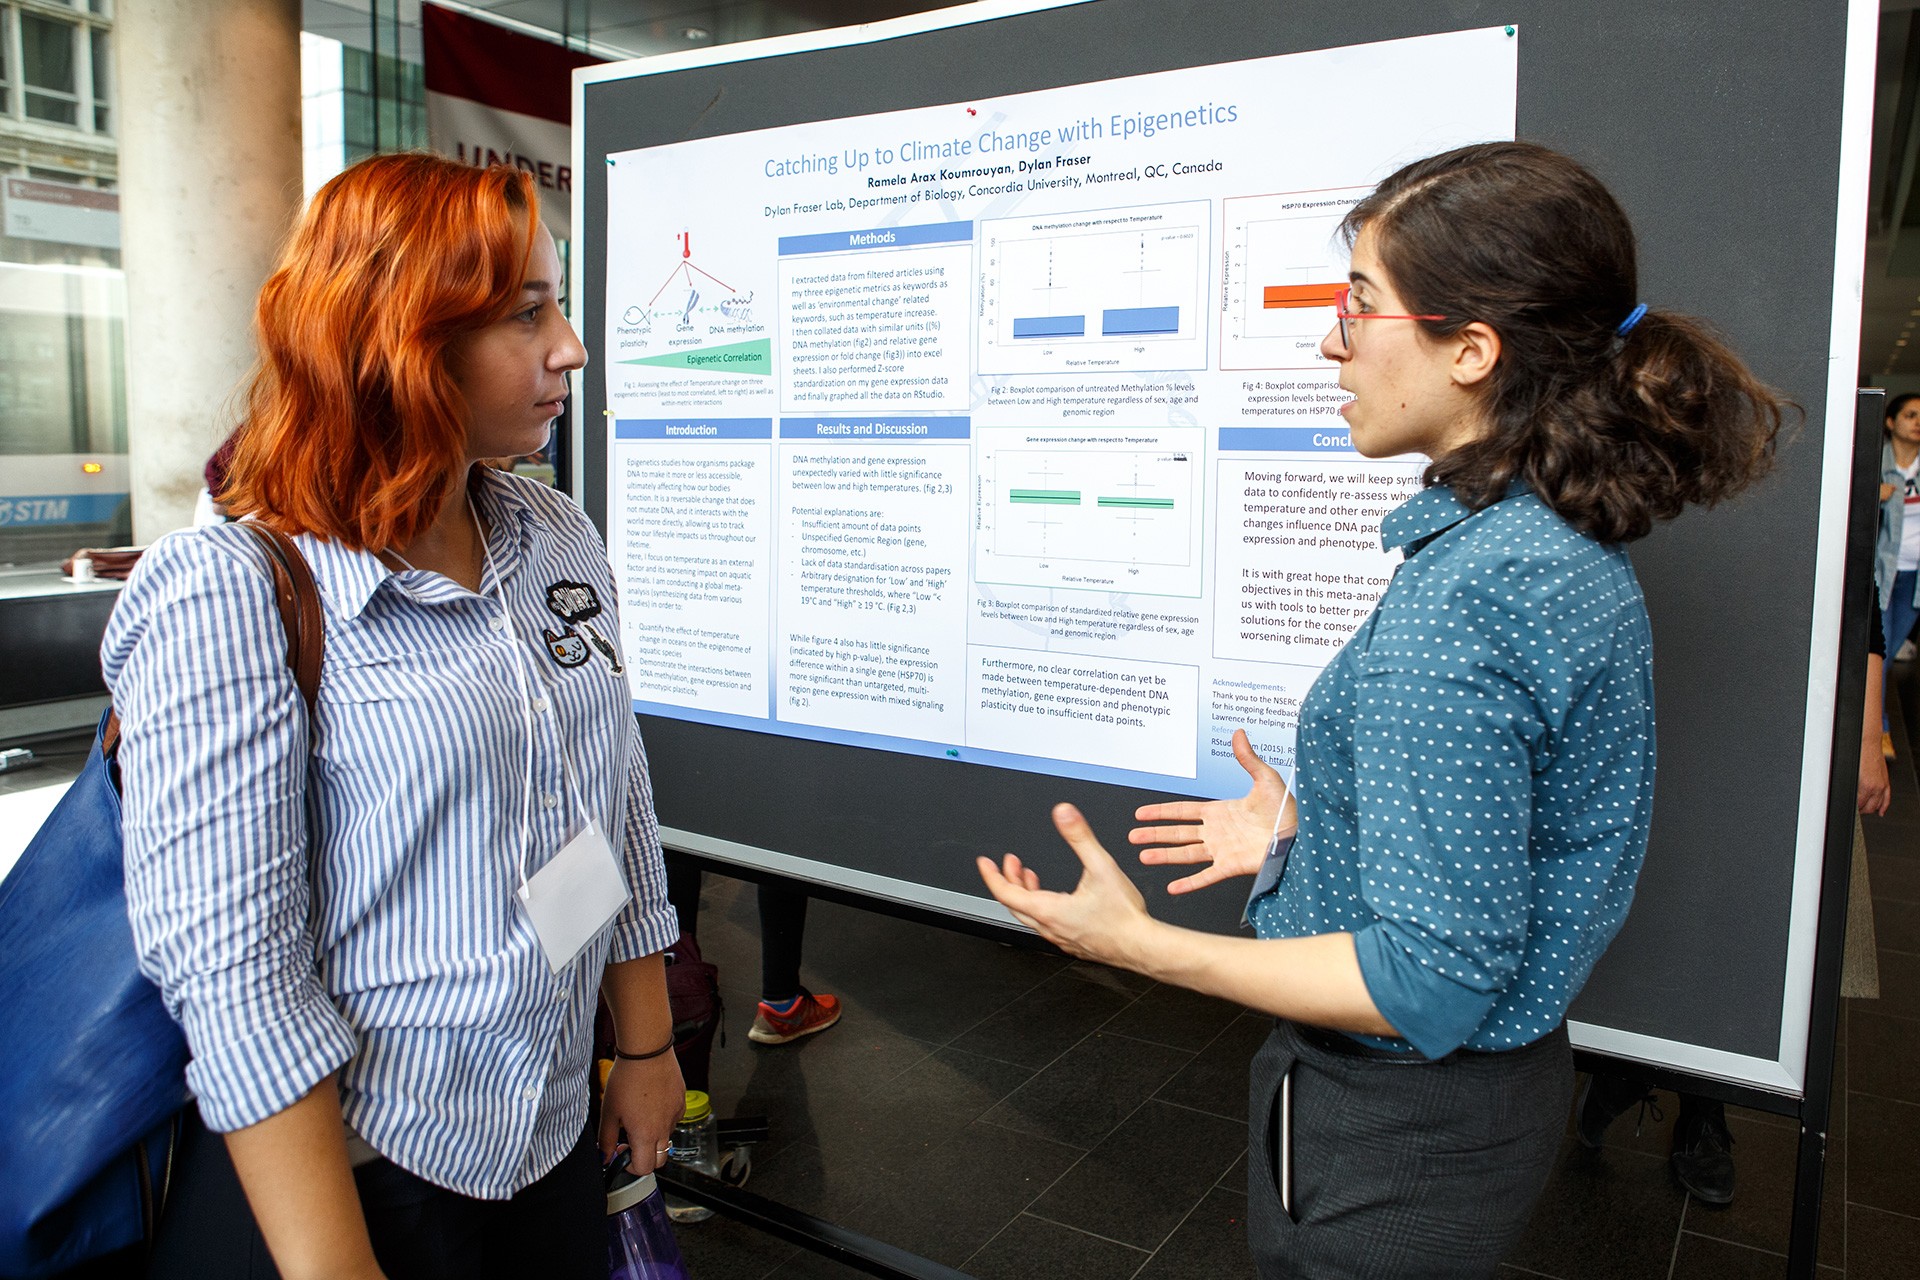 Female student explaining a research poster to another female student